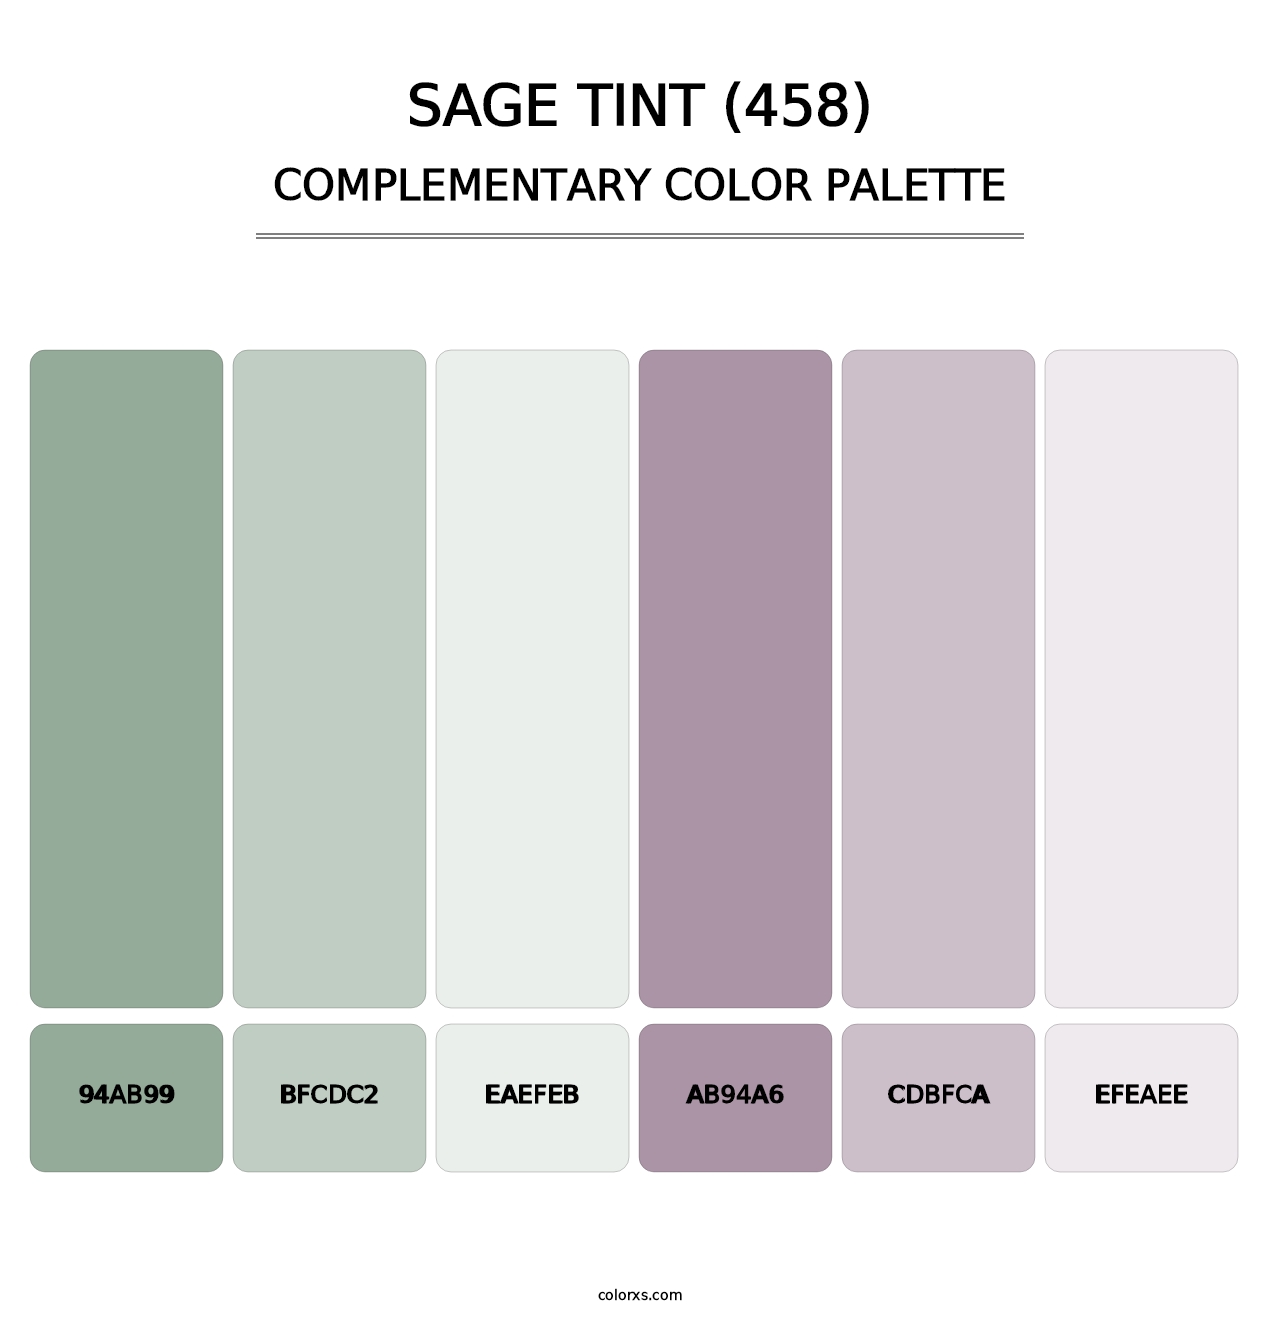 Sage Tint (458) - Complementary Color Palette